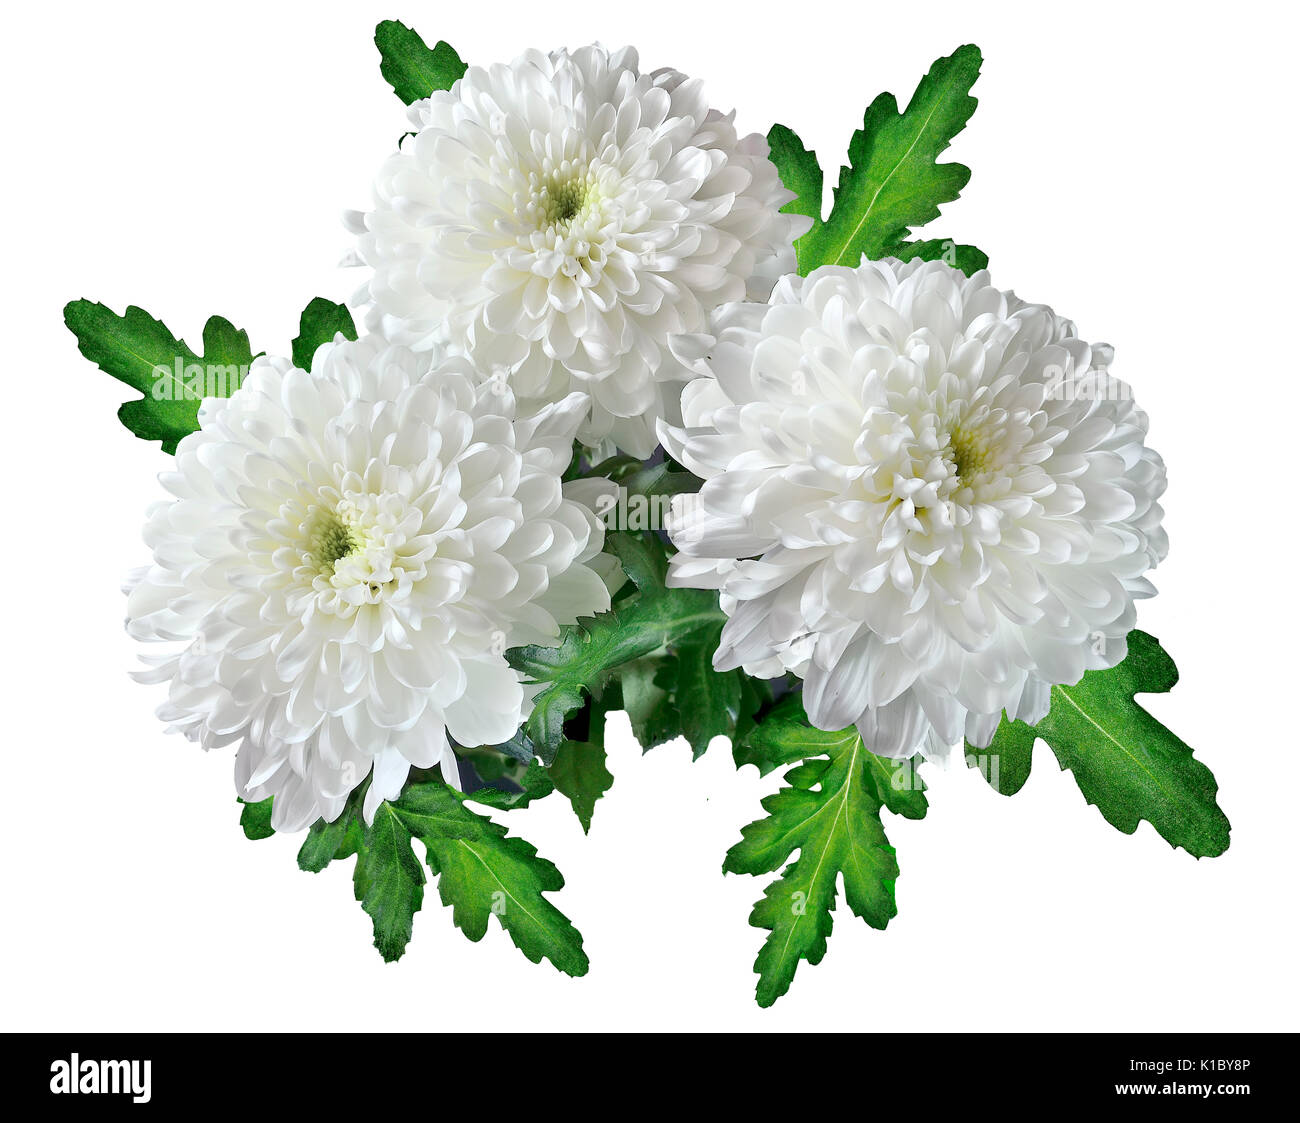 Three white chrysanthemums bouquet with green leaves close up, isolated on a white background Stock Photo